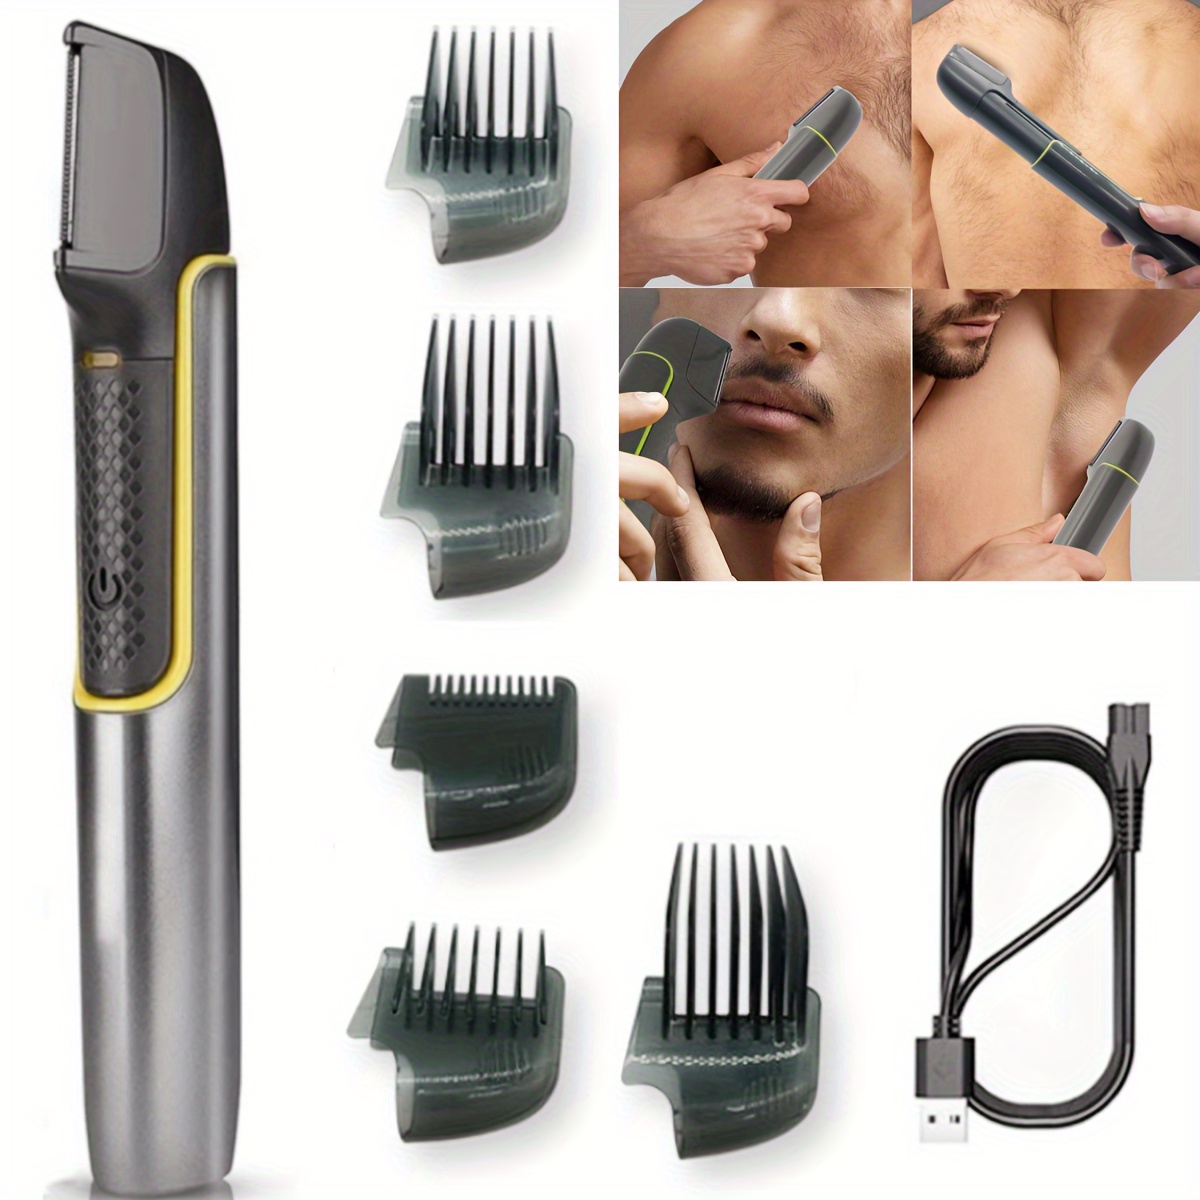 

Body Hair Trimmer, Extendable Back Hair Trimming Device, Groin Hair Trimmer For Men, Rechargeable Pubic Back Body Shaver Razor For Men And Women, Bikini Trimmer, Holiday Gift Father's Day Gift